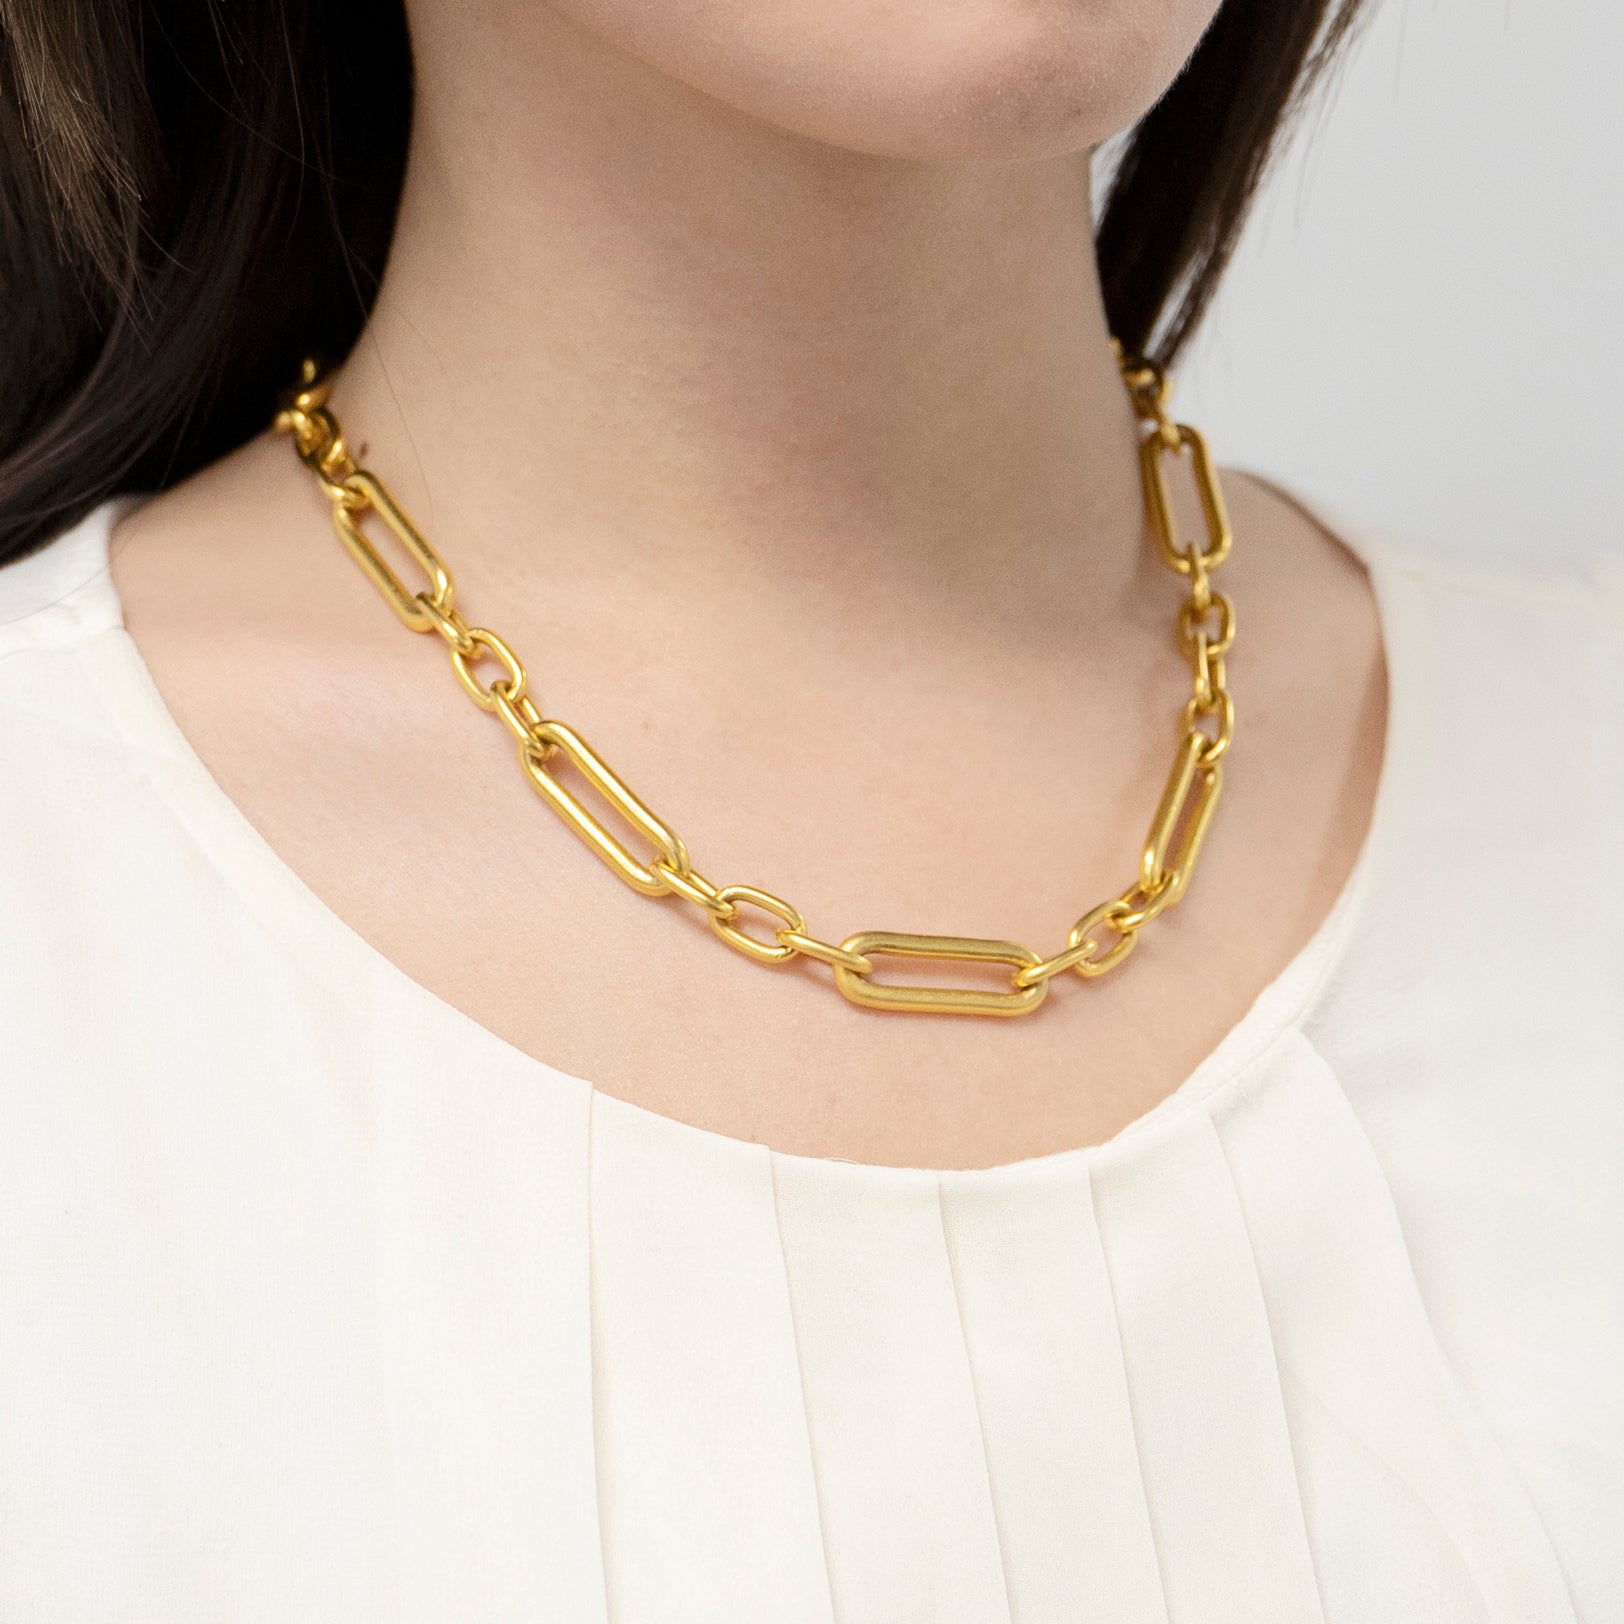 Ben-Amun Exclusive 24k Gold-plated Necklace in Metallic | Lyst